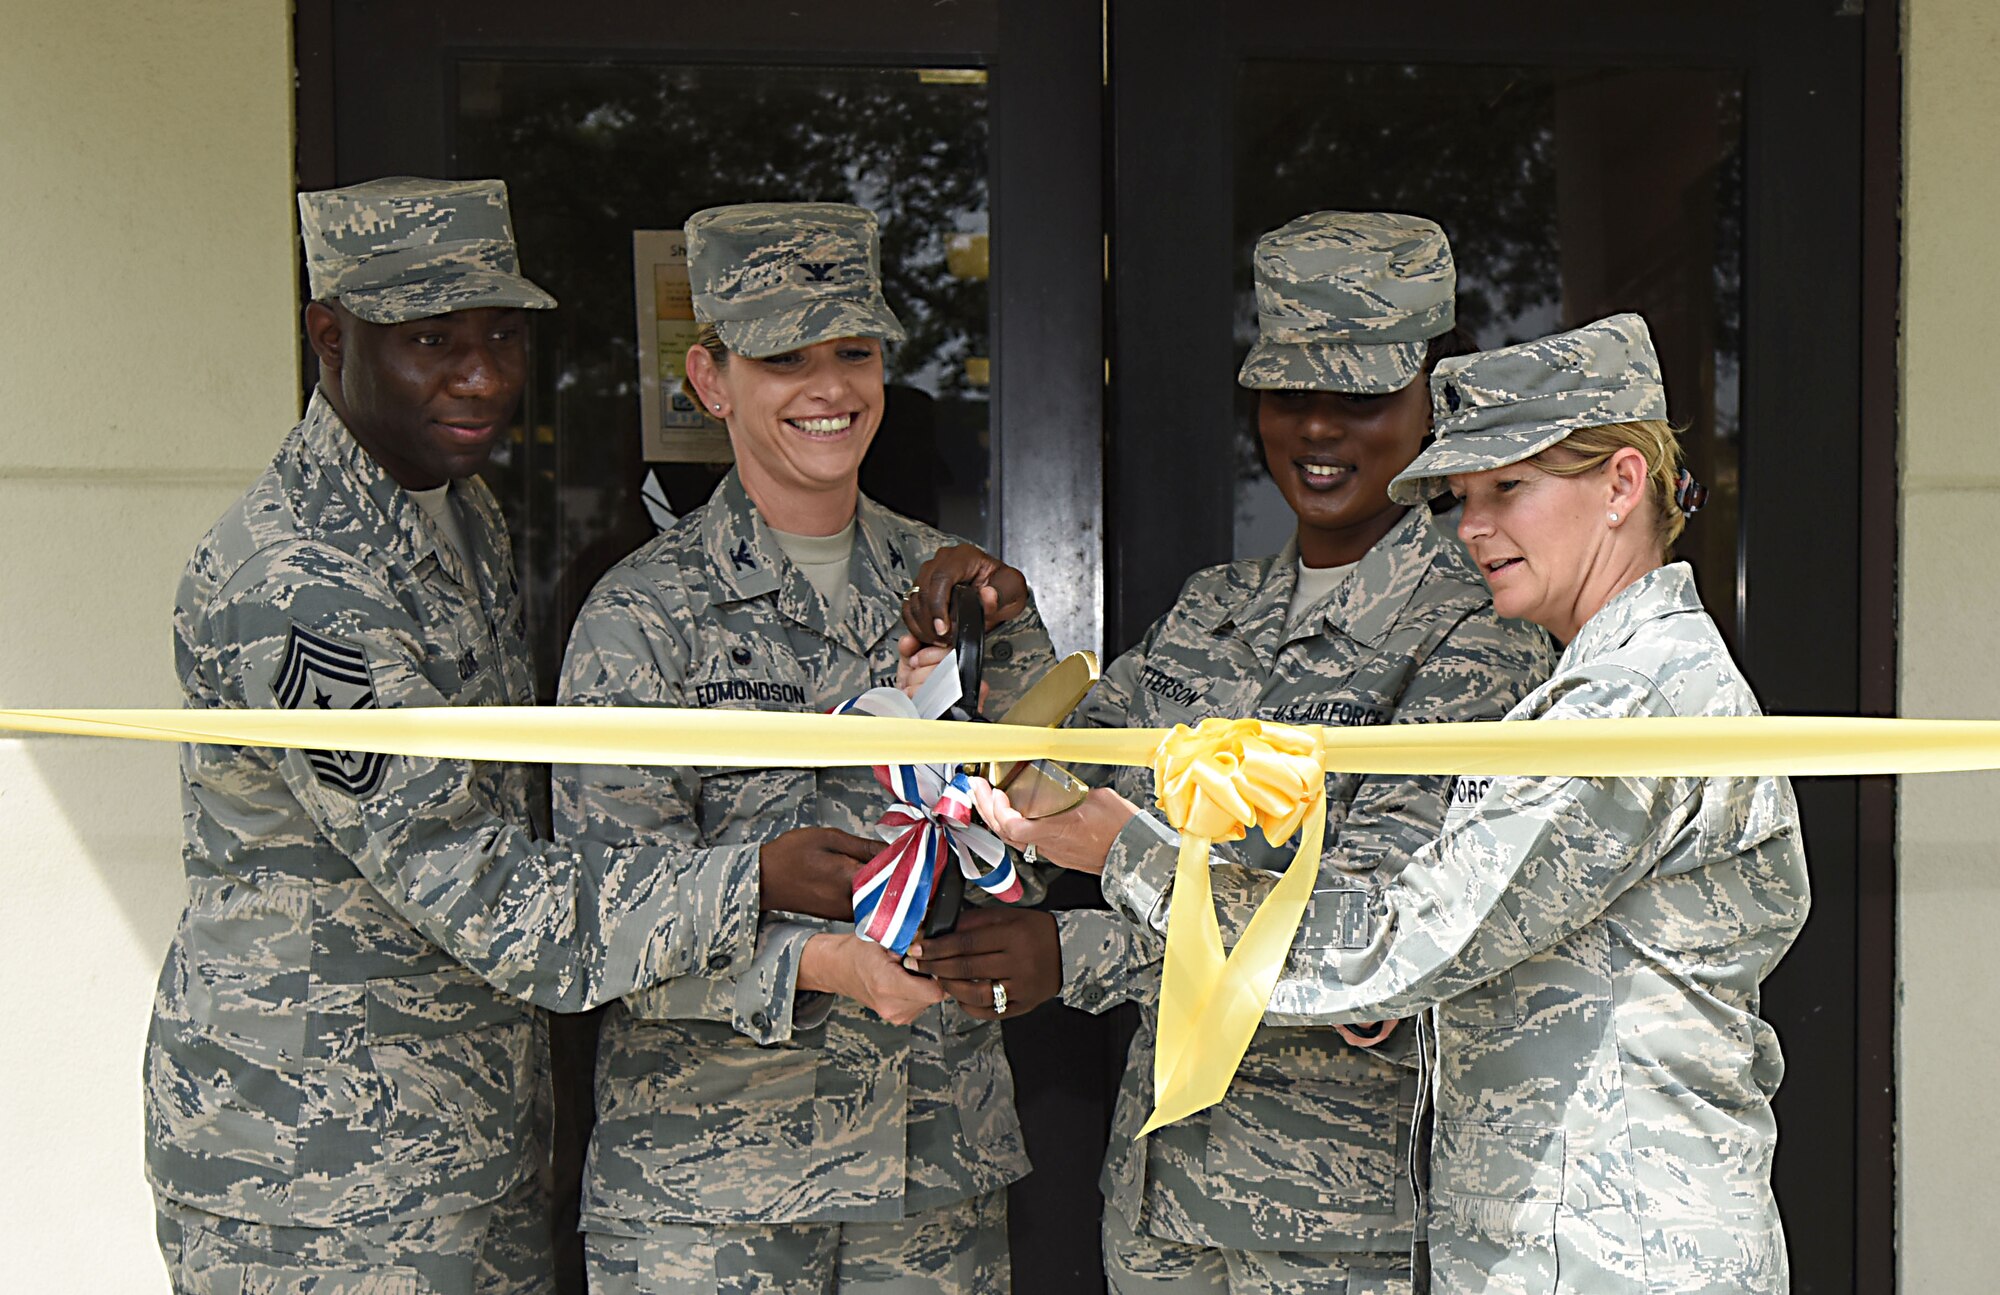 Base leadership and members of the 81st Force Support Squadron participate in a ribbon cutting ceremony during the Professional Development Center’s grand reopening ceremony May 17, 2017, on Keesler Air Force Base, Miss. The renovated facility offers developmental opportunities and various courses that fit the needs of officers, enlisted, civilians or reservists. (U.S. Air Force photo by Kemberly Groue)